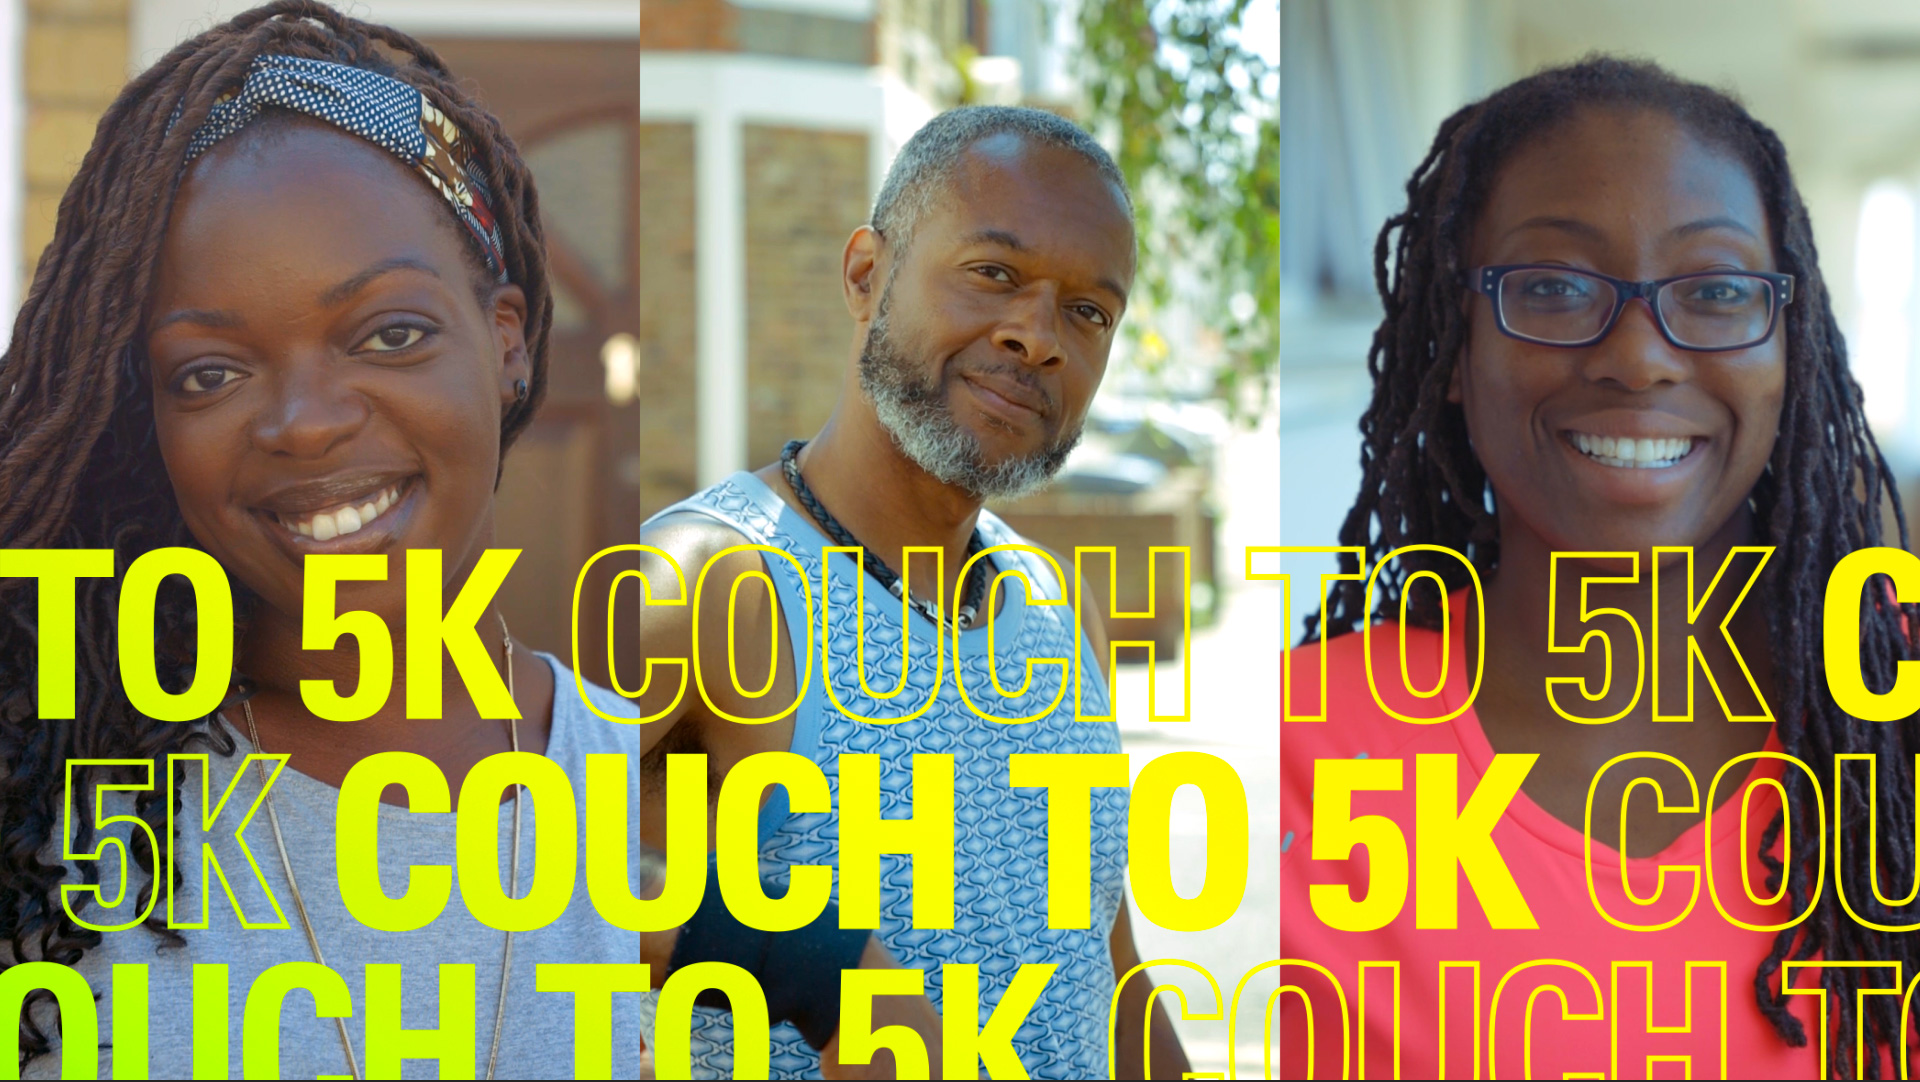 Sport London – Couch to 5K